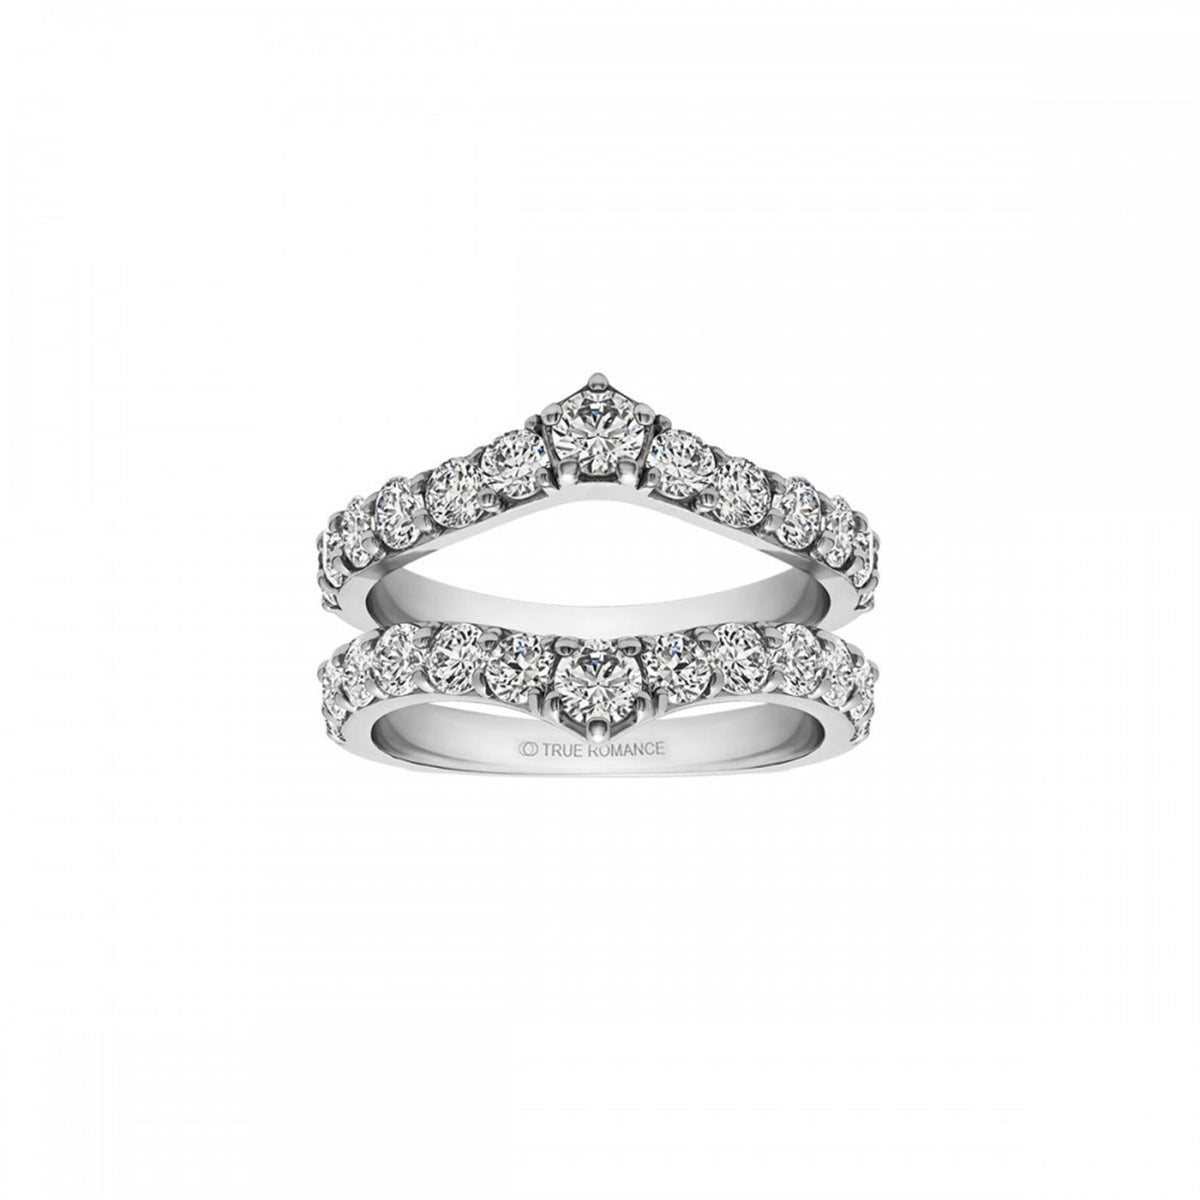 14Kt White Gold Insert Guard / Wrap Insert Guard Ring With 2.00cttw Natural Diamonds